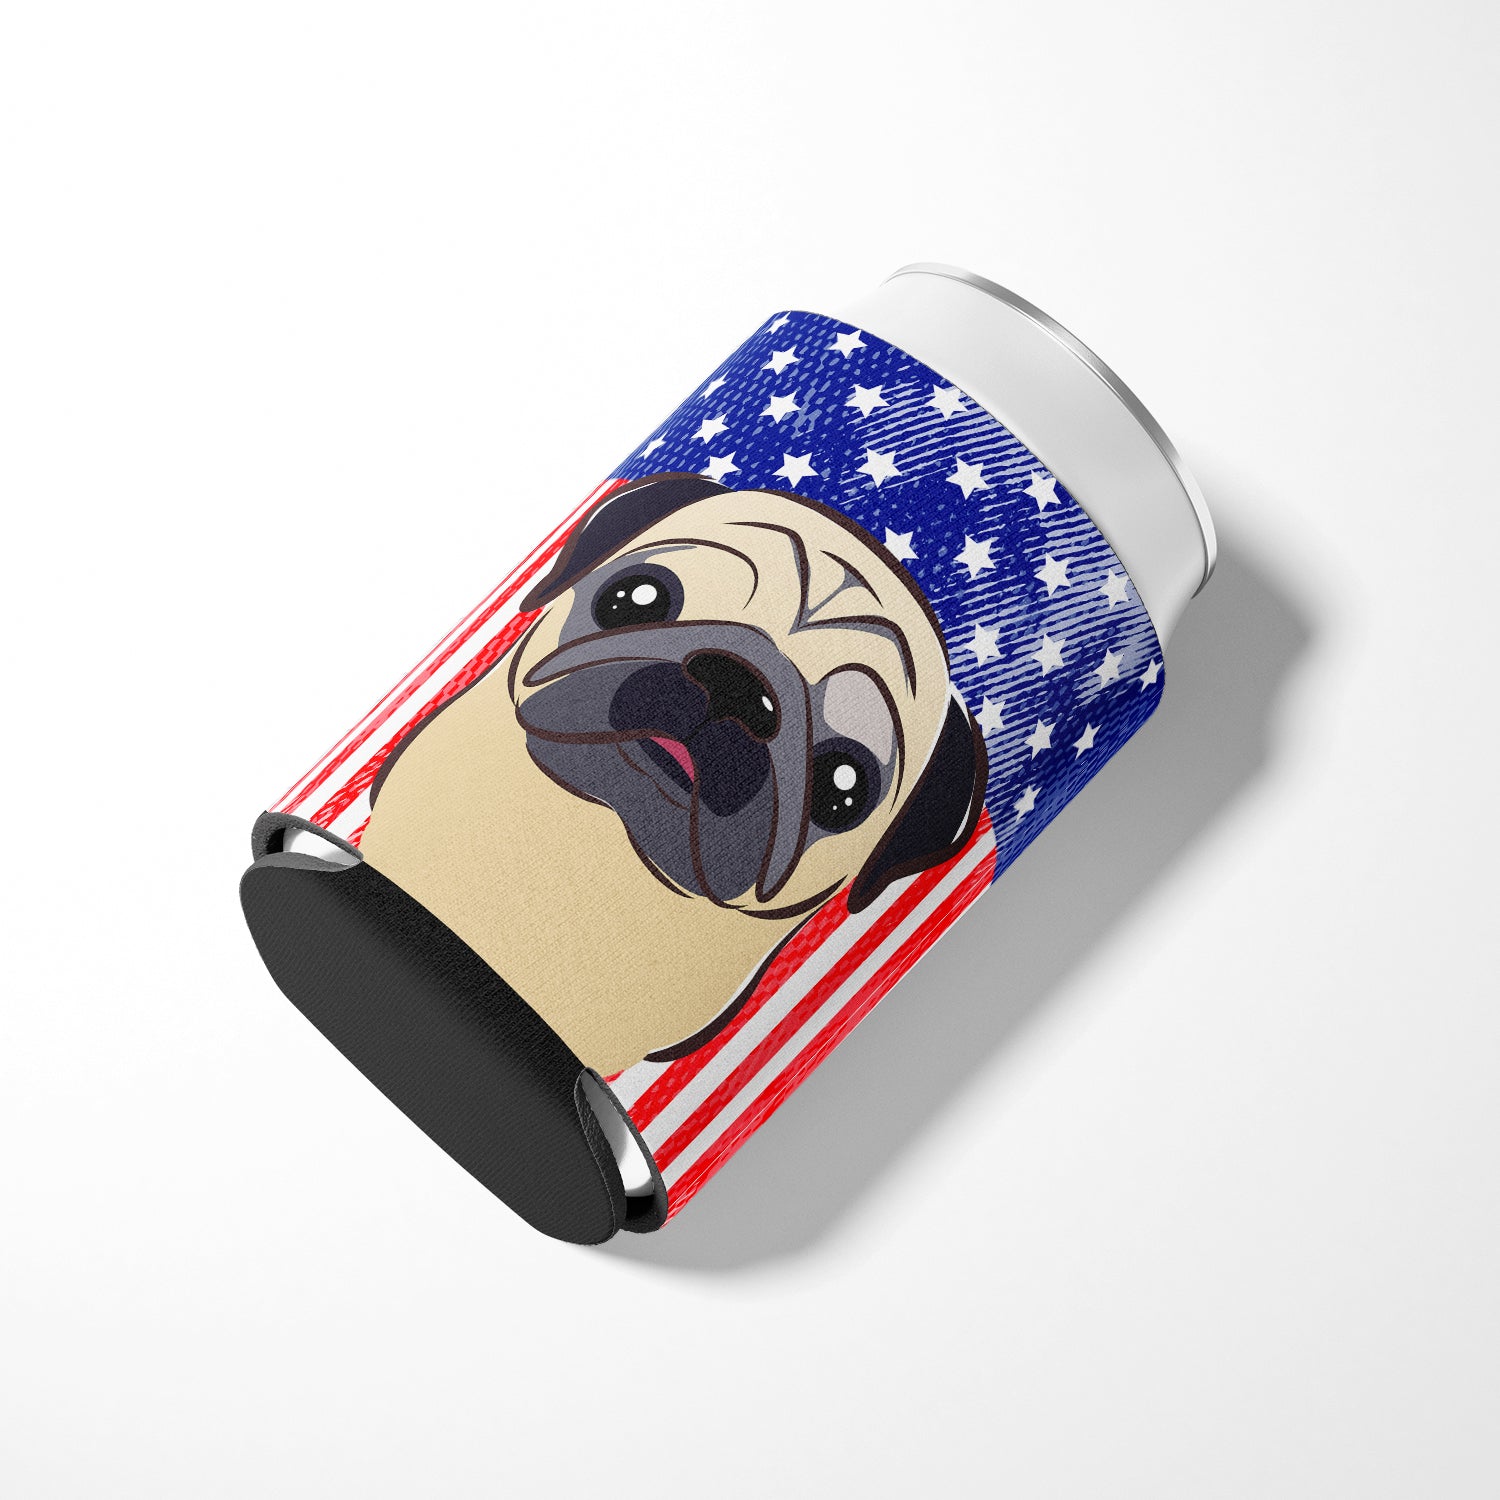 American Flag and Fawn Pug Can or Bottle Hugger BB2192CC.